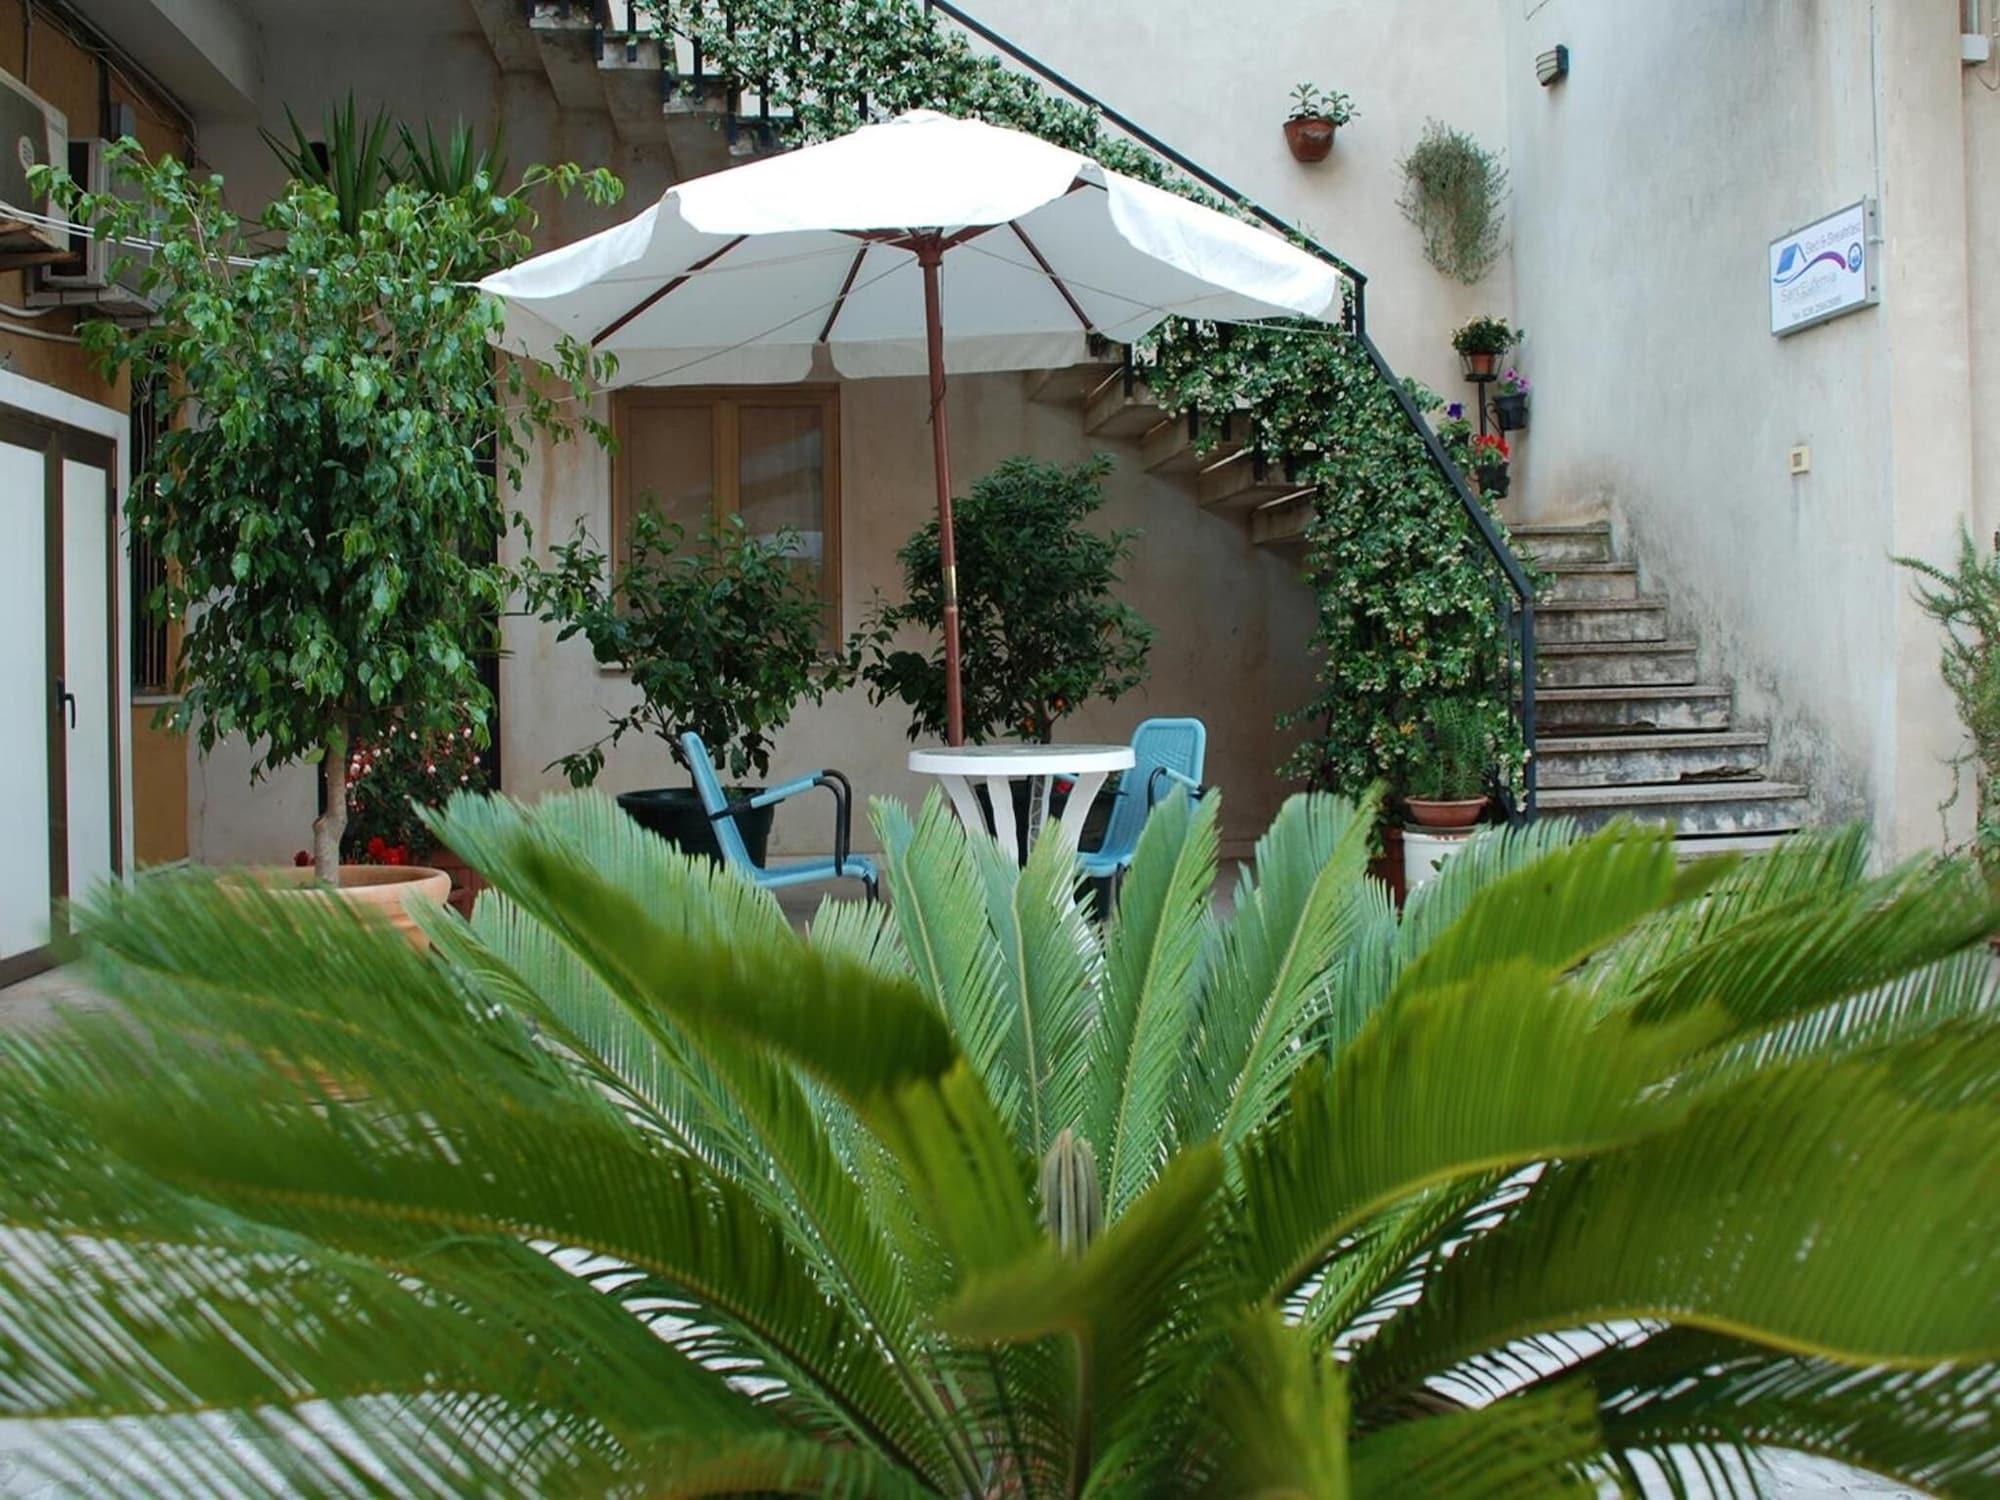 Bed and breakfast Sant'Eufemia image